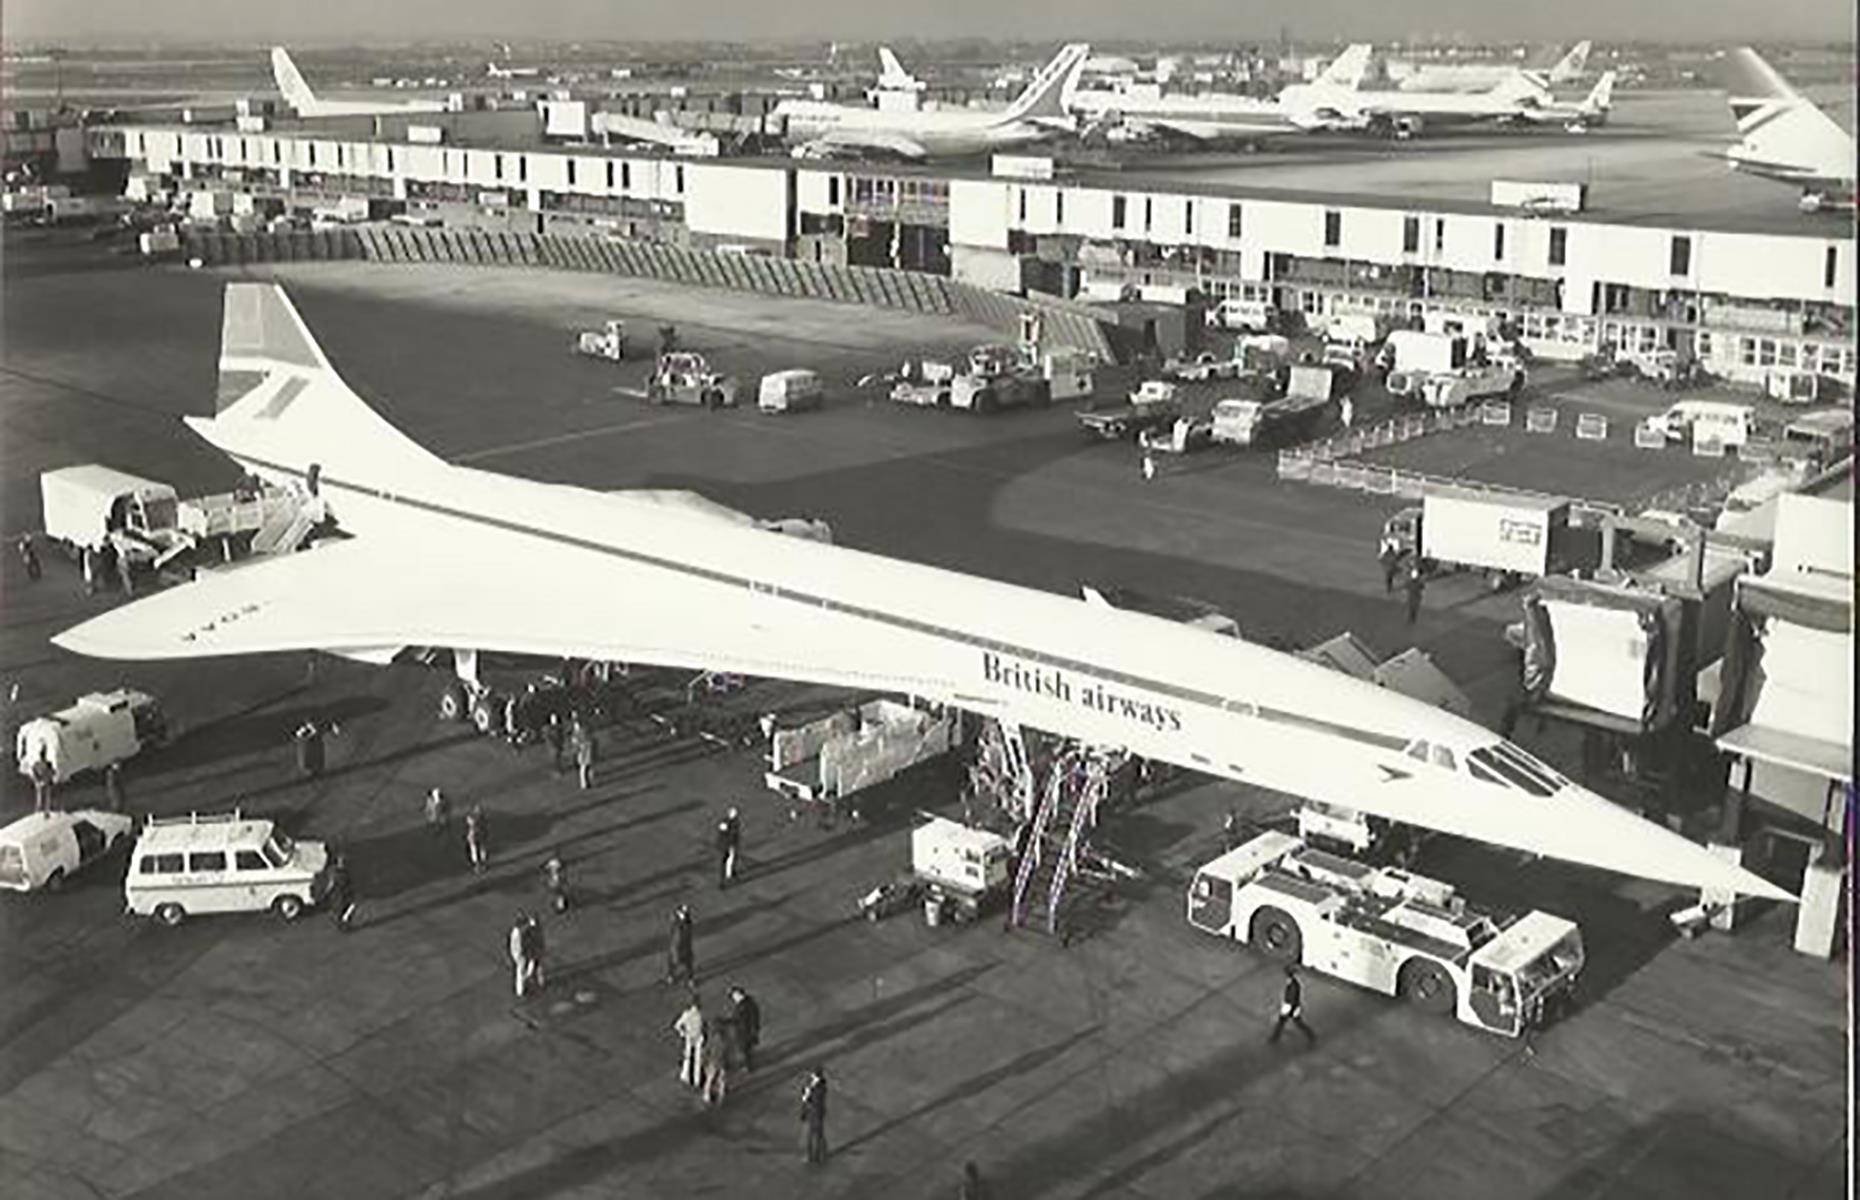 Slide 27 of 51: Though many airlines initially showed interest in Concorde, numerous orders were dropped as concerns were raised as to the aircraft's noise, environmental impact and economic potential. In the end, only Air France and BOAC would operate this aircraft. It's pictured here at London Heathrow in 1976 as it begins service with a BOAC flight from the UK to Bahrain.